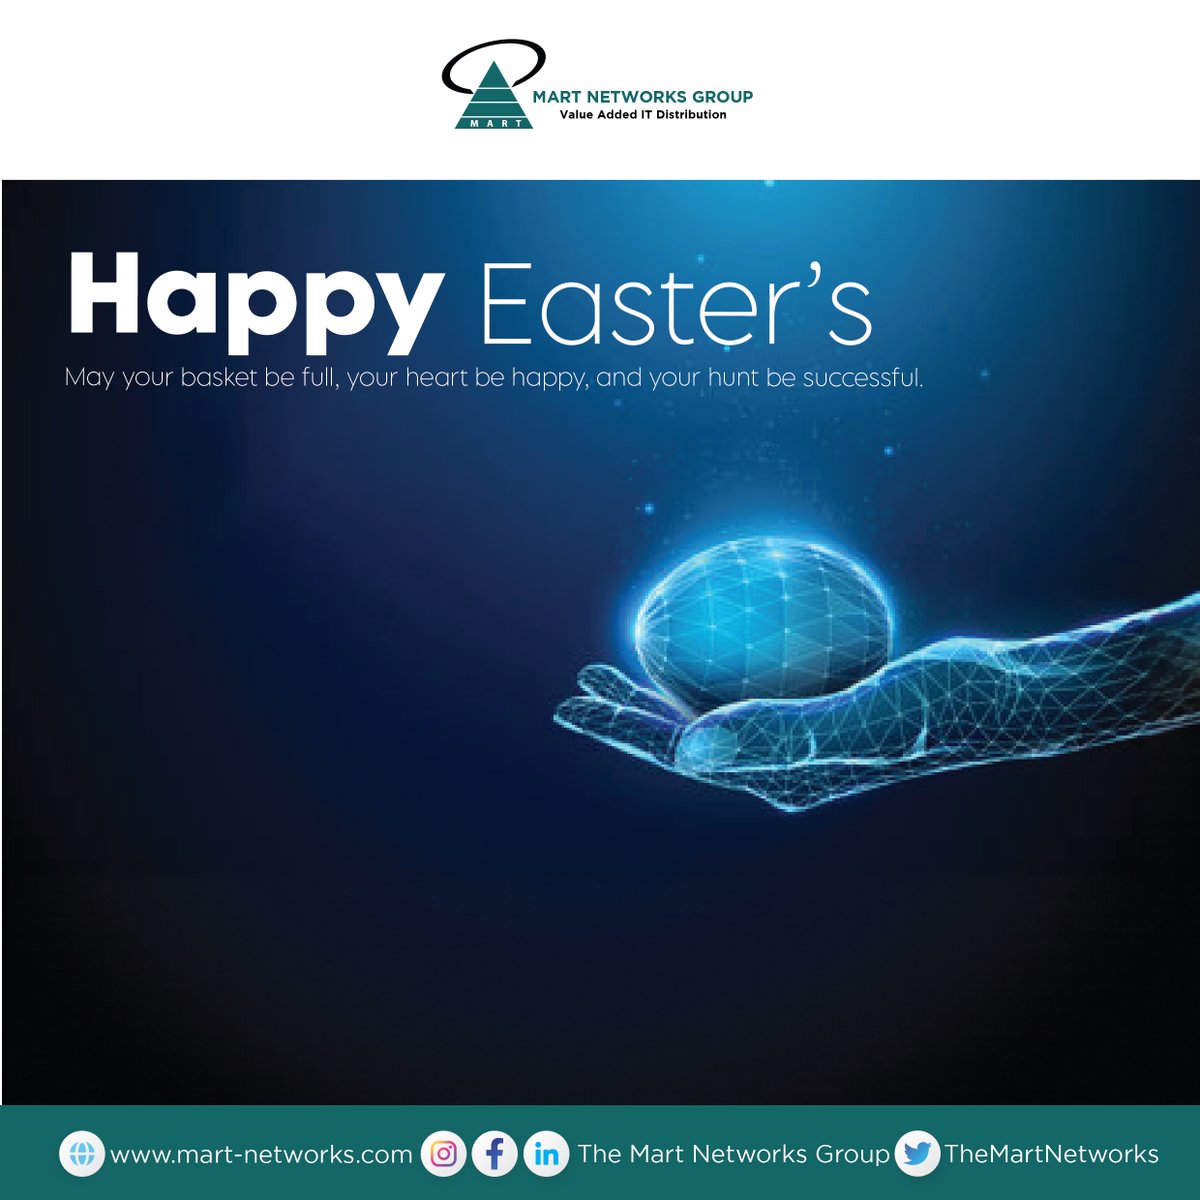 We hope that you have a beautiful Easter full of joy and love,
Happy Easter To You From The Mart Networks Group.

#themartnetworksgroup #youronestopitdistributor #easter2023 #holiday #love #happyeaster